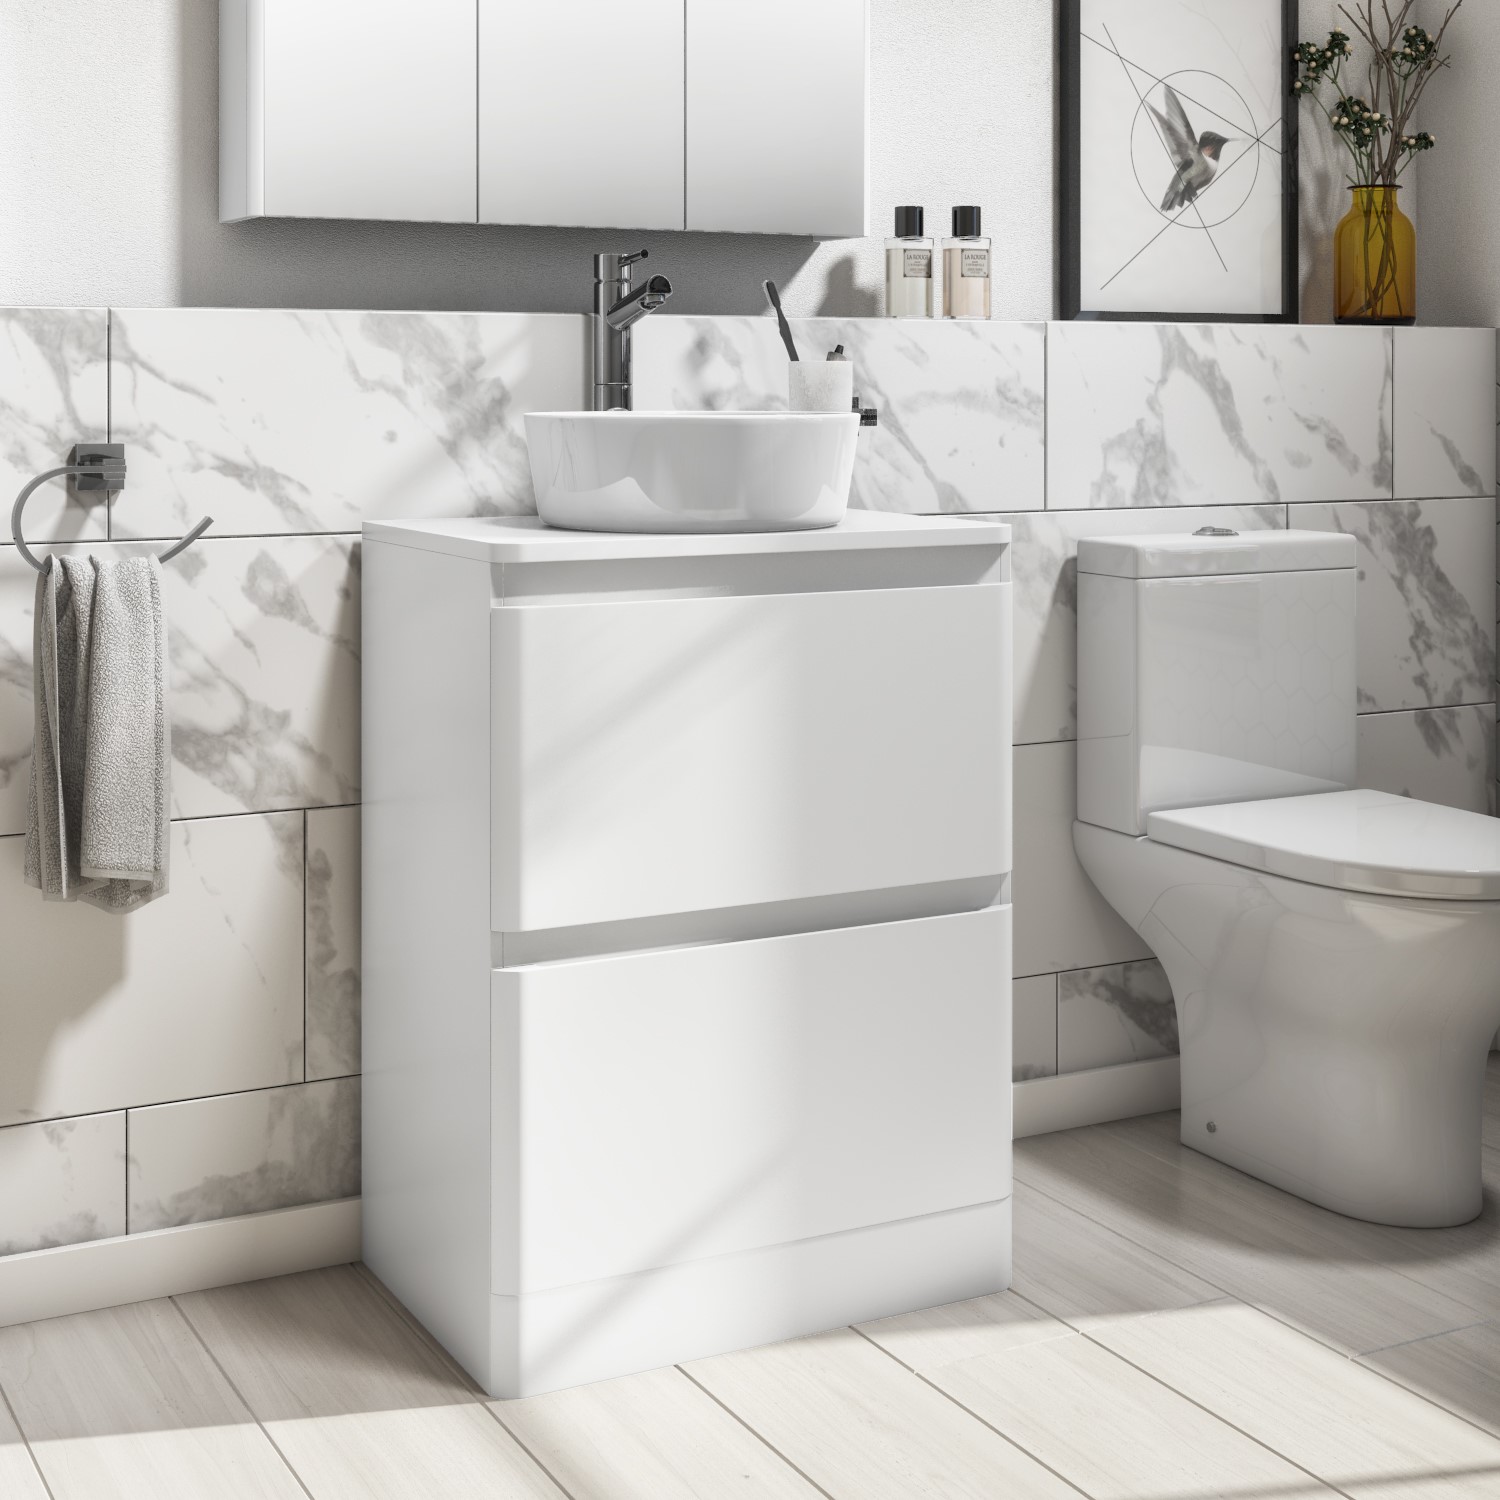 600mm White Freestanding Countertop Vanity Unit With Basin Pendle Best Bath Items At 